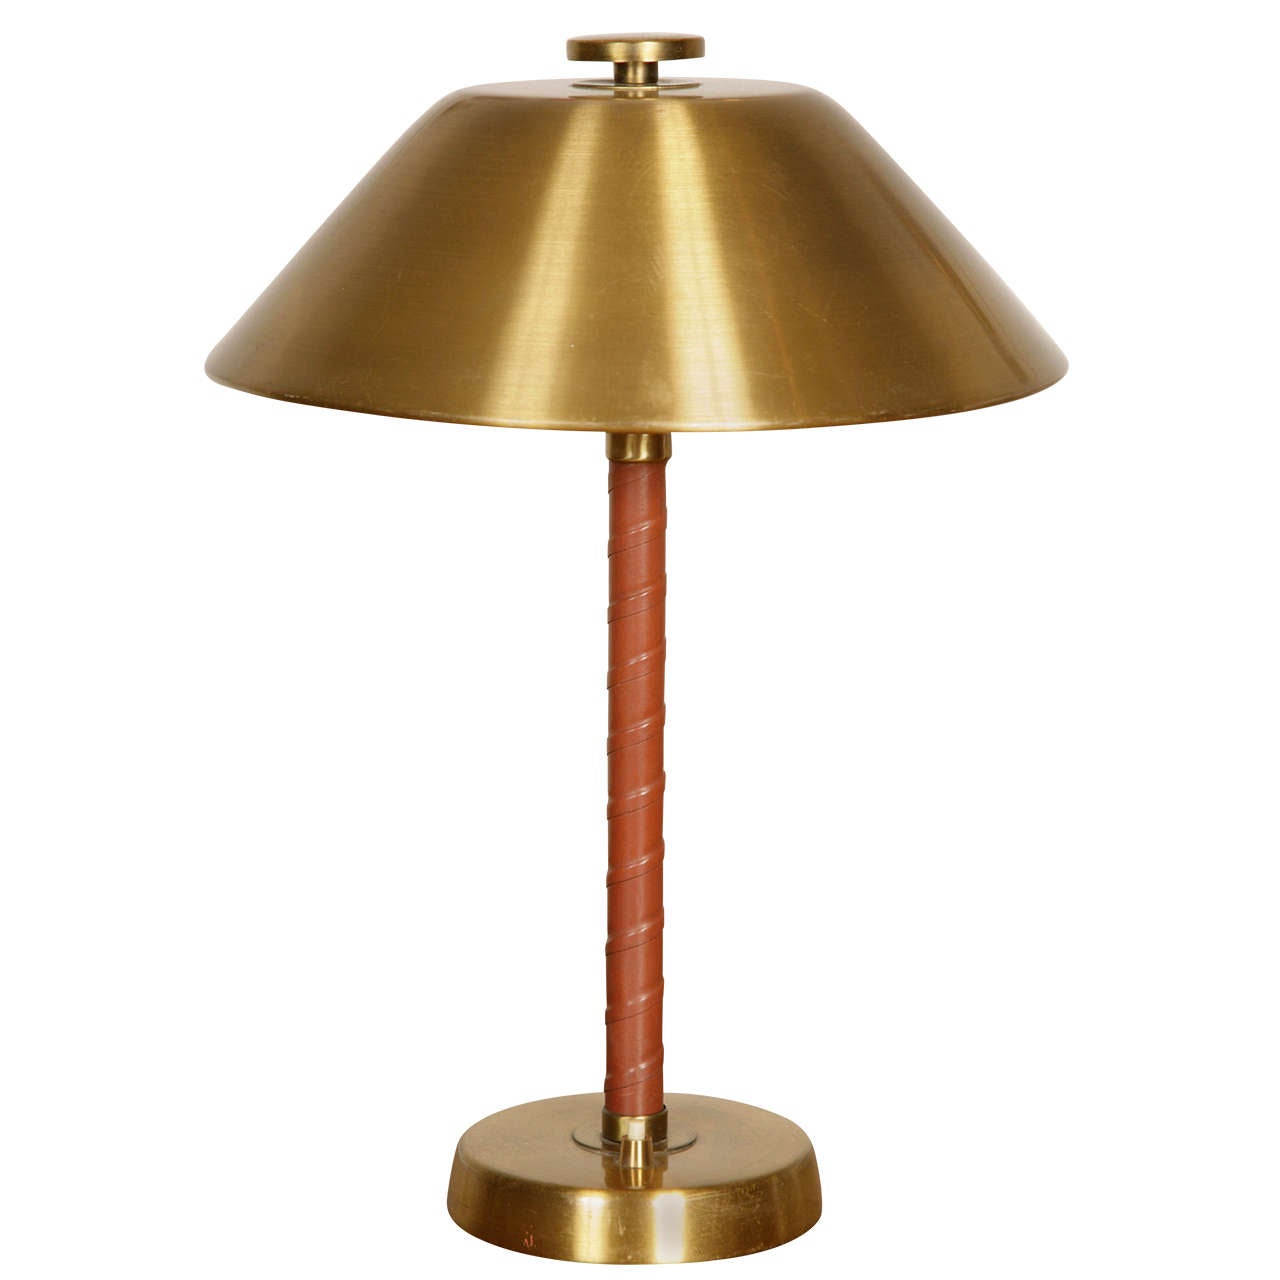 Metal and Leather Table Lamp